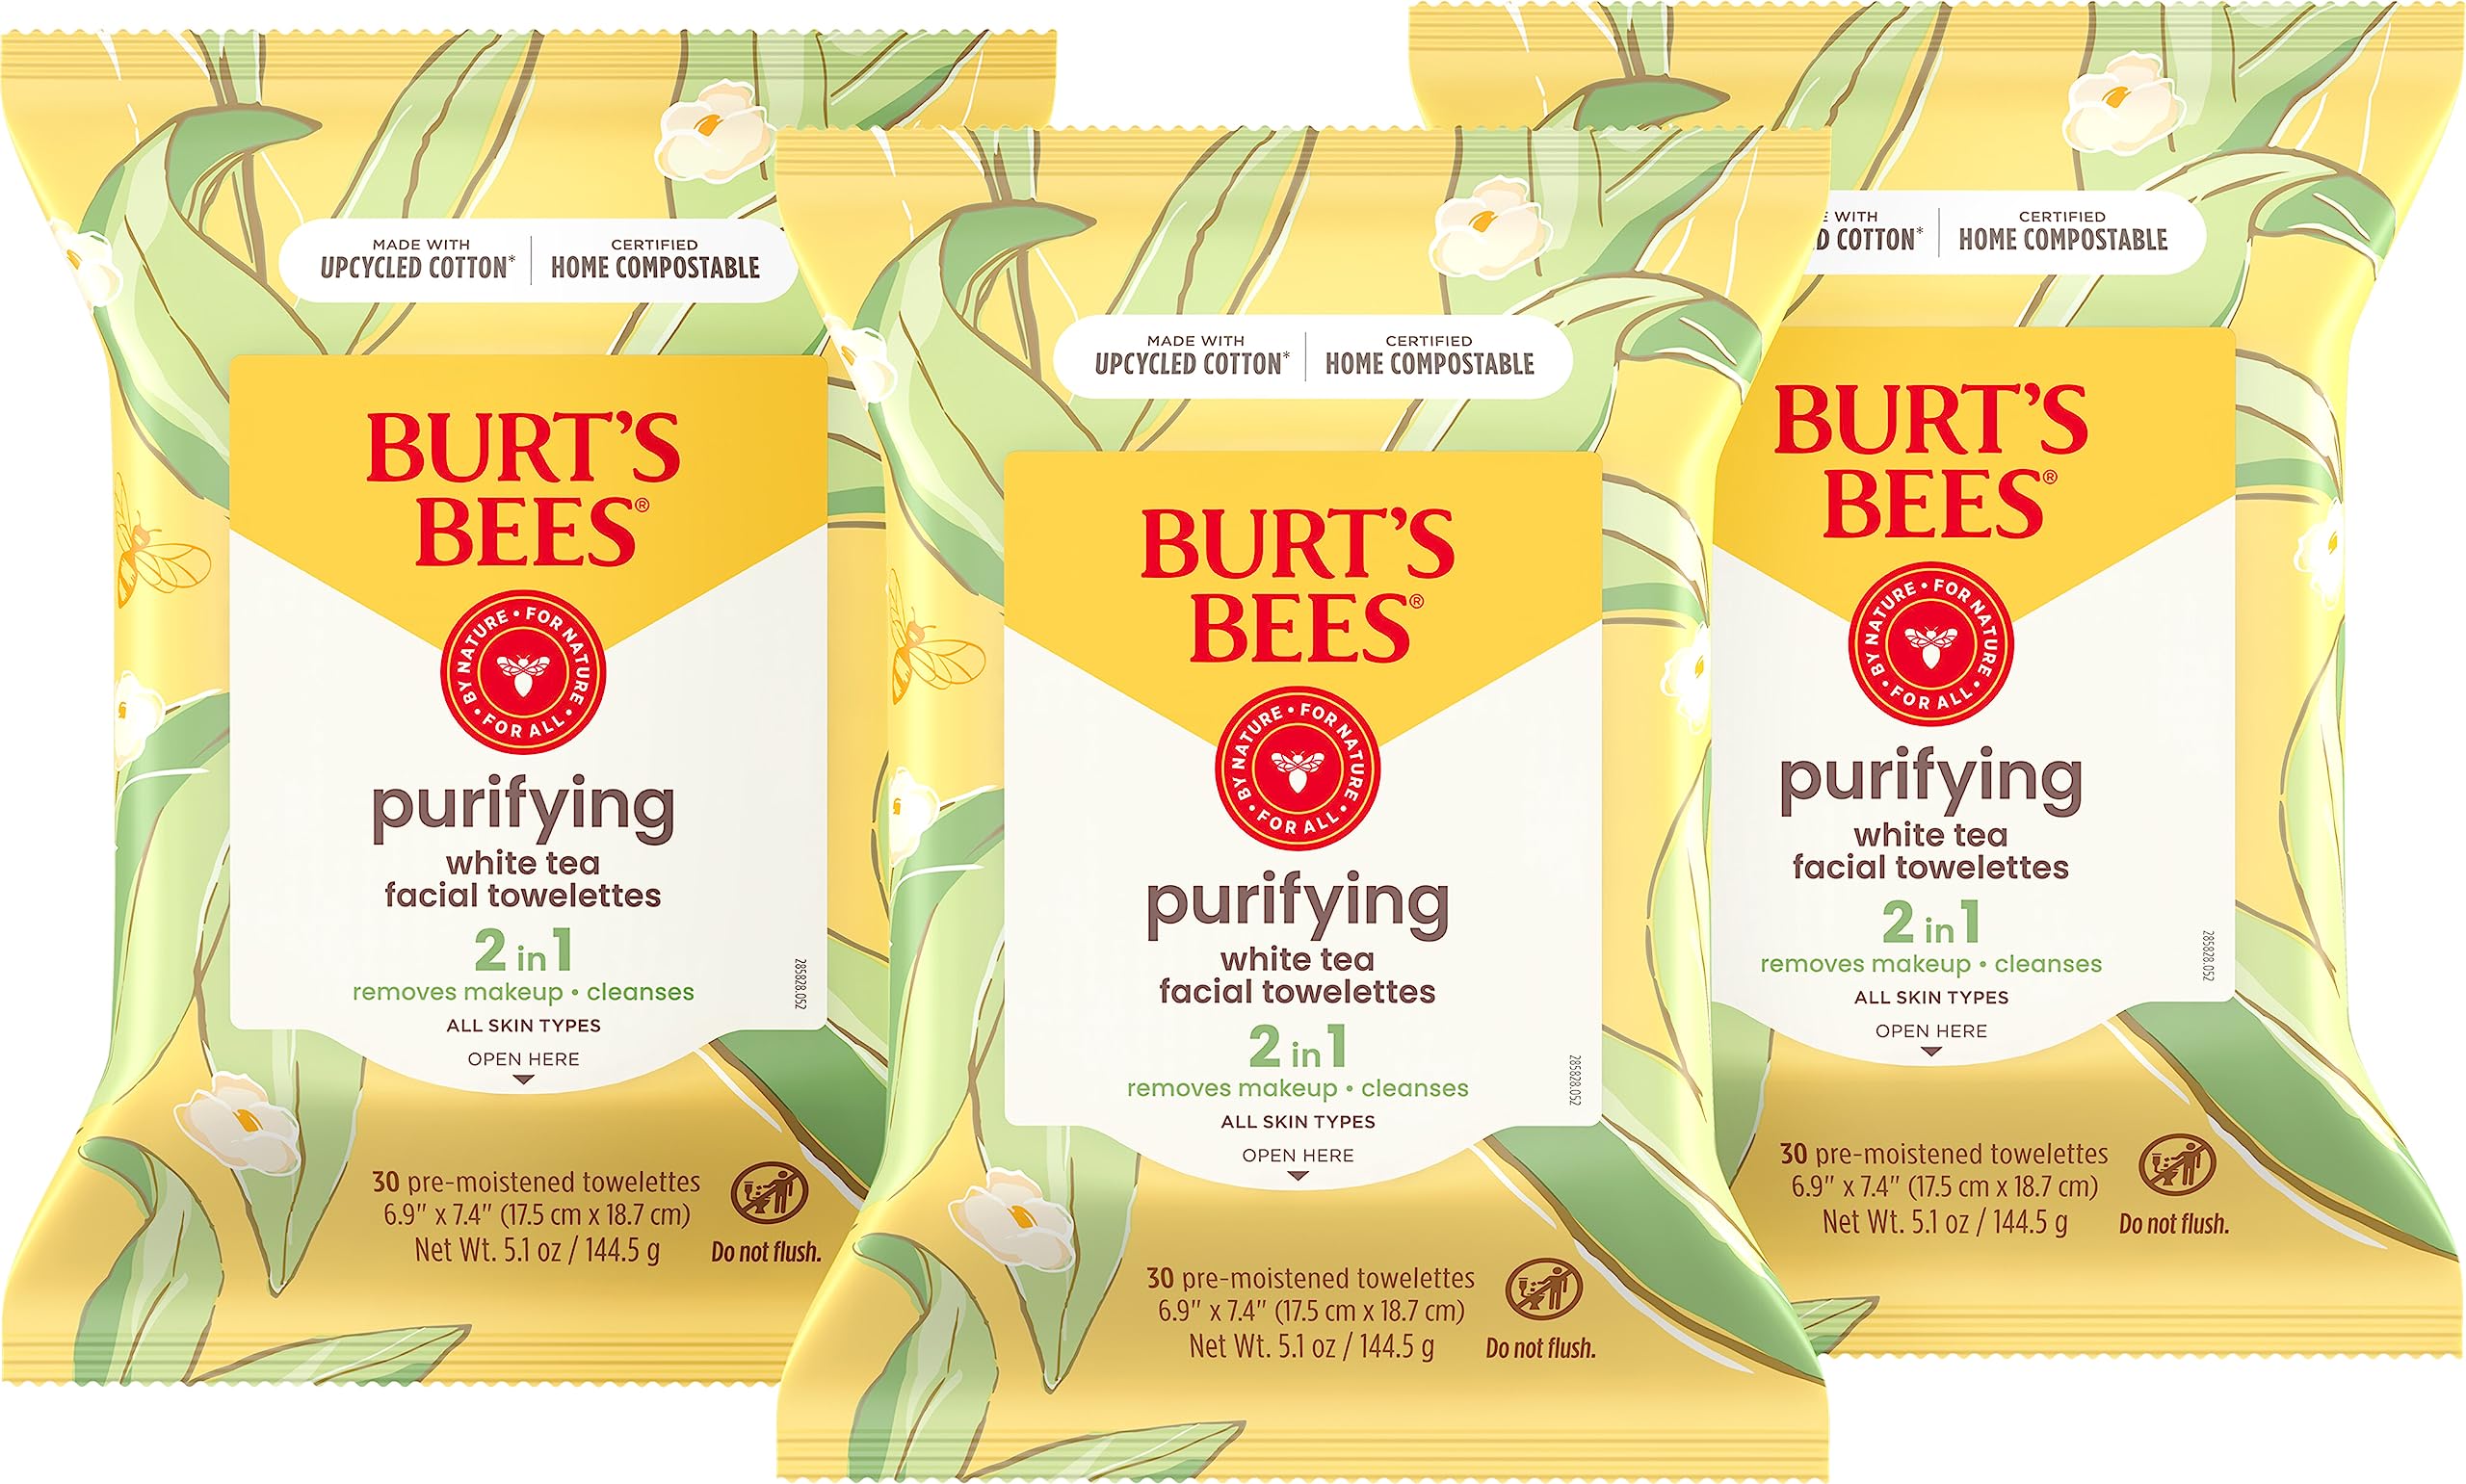 Burt's Bees Face Wipes, Makeup Remover Facial Cleansing Towelettes for All Skin Types, Hydrating with White Tea Extract, 30 Count (Pack of 3)